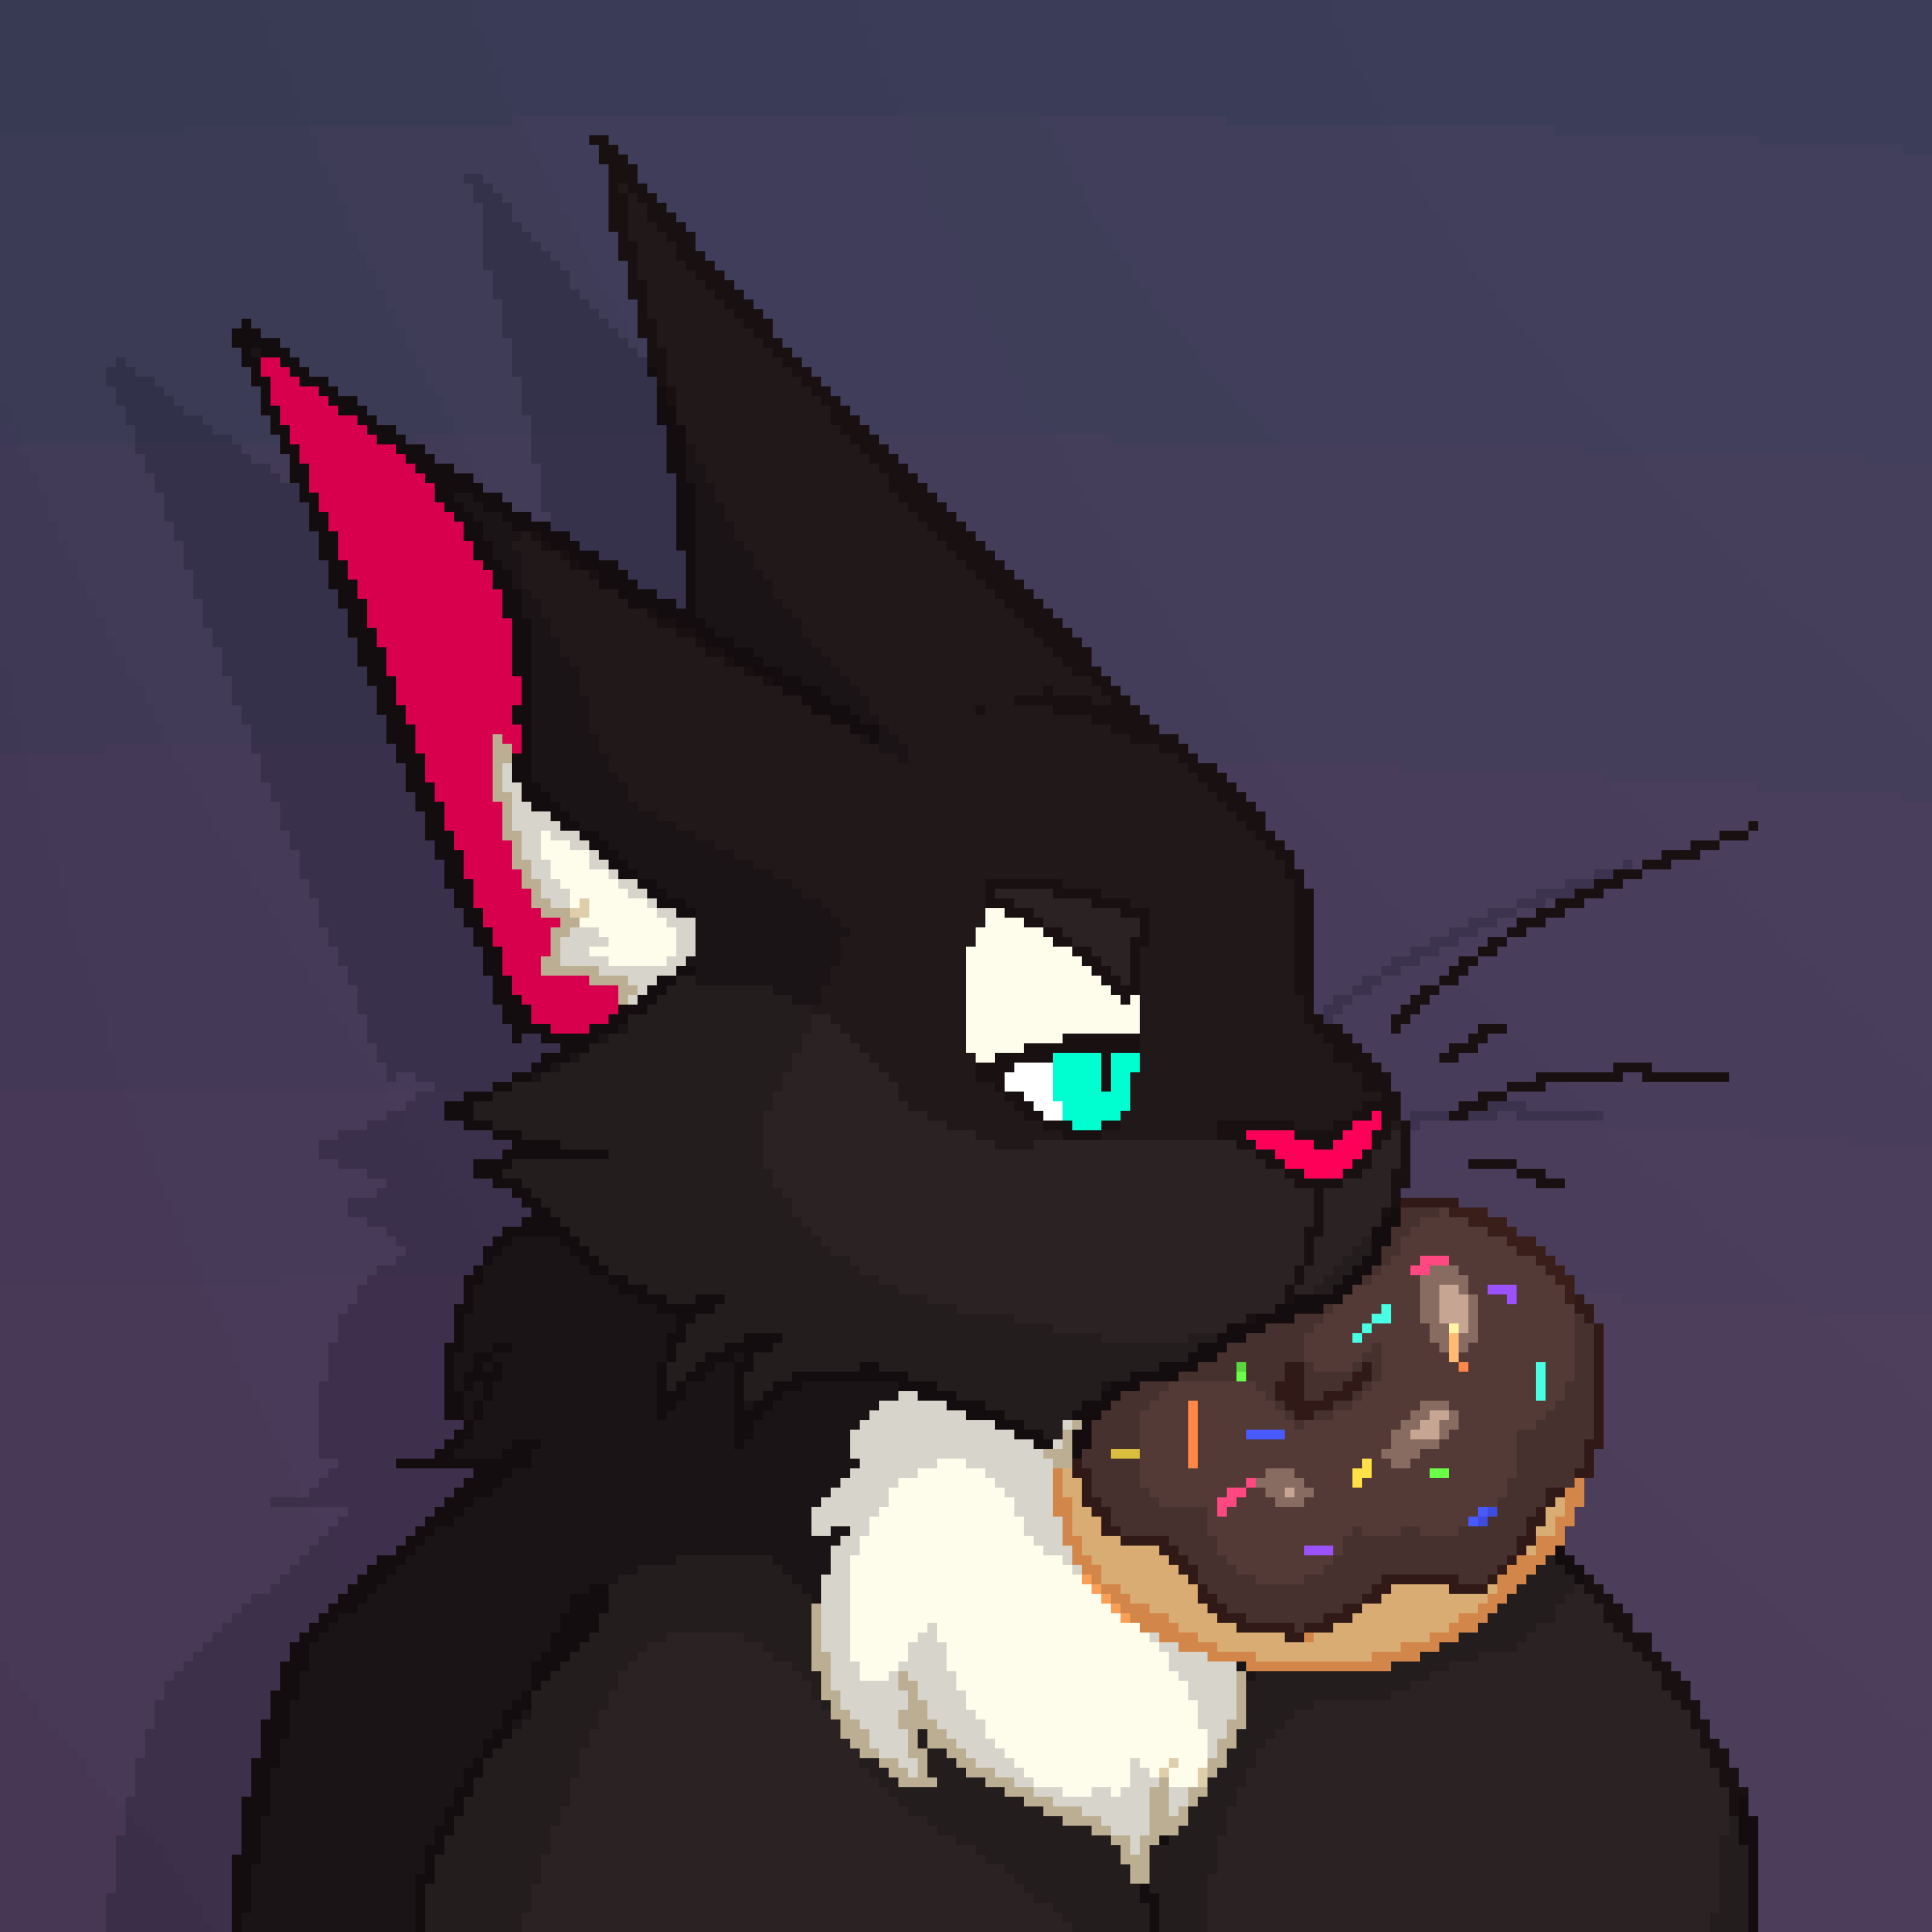 A tuxedo cat anthrow with a chocolate-frosted donut in its mouth.